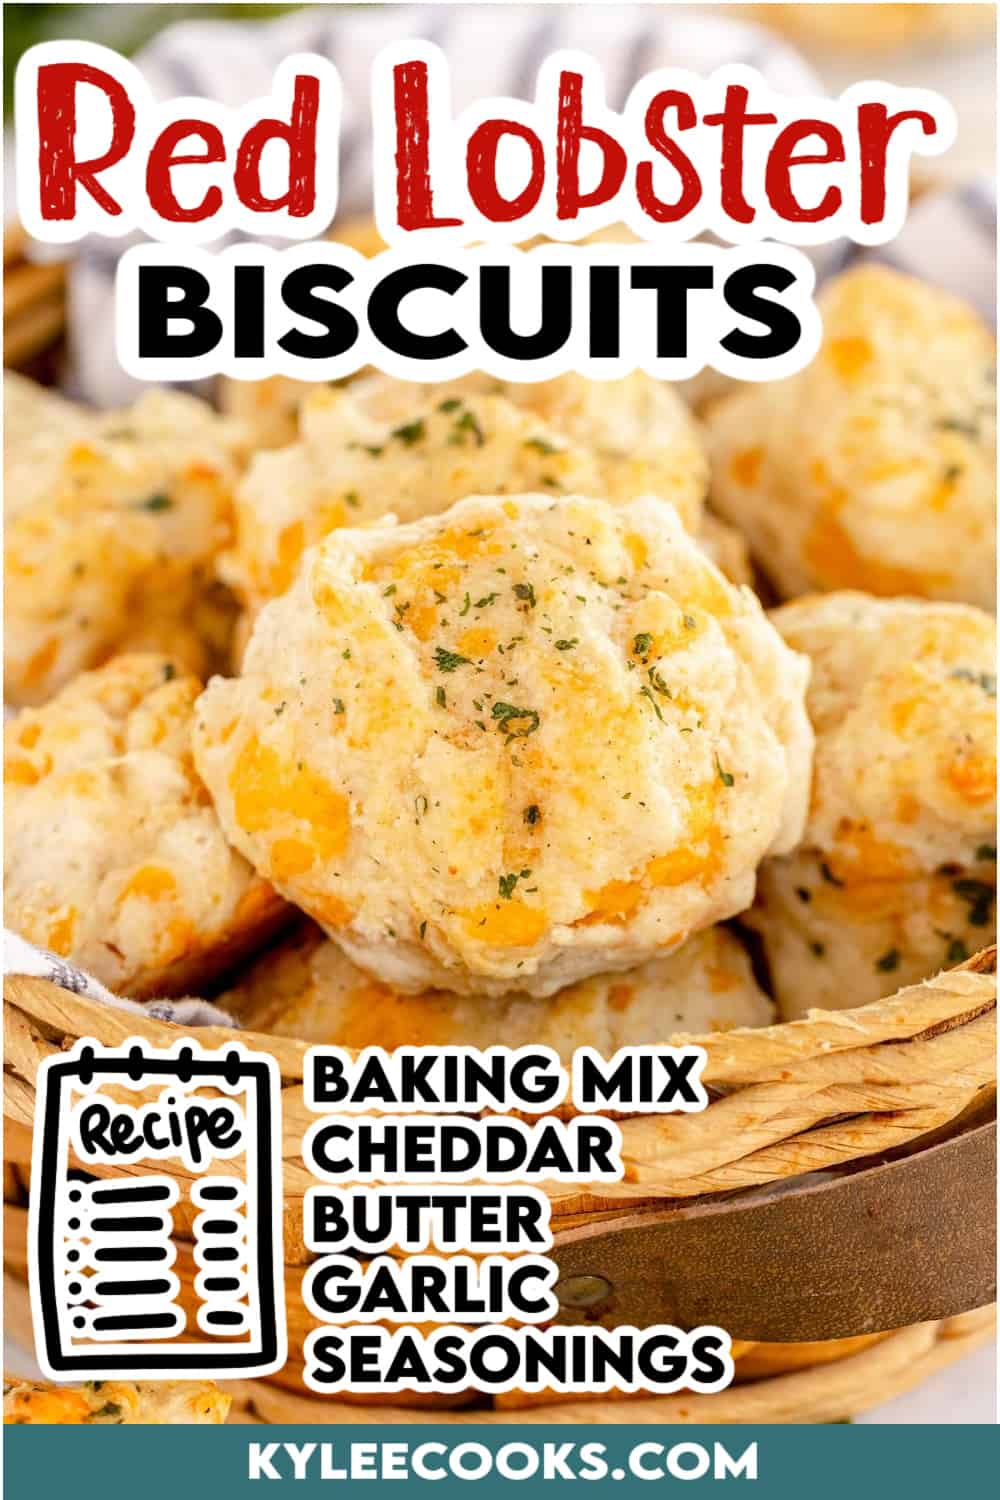 red lobster biscuits in a basket with recipe and ingredients overlaid in text.